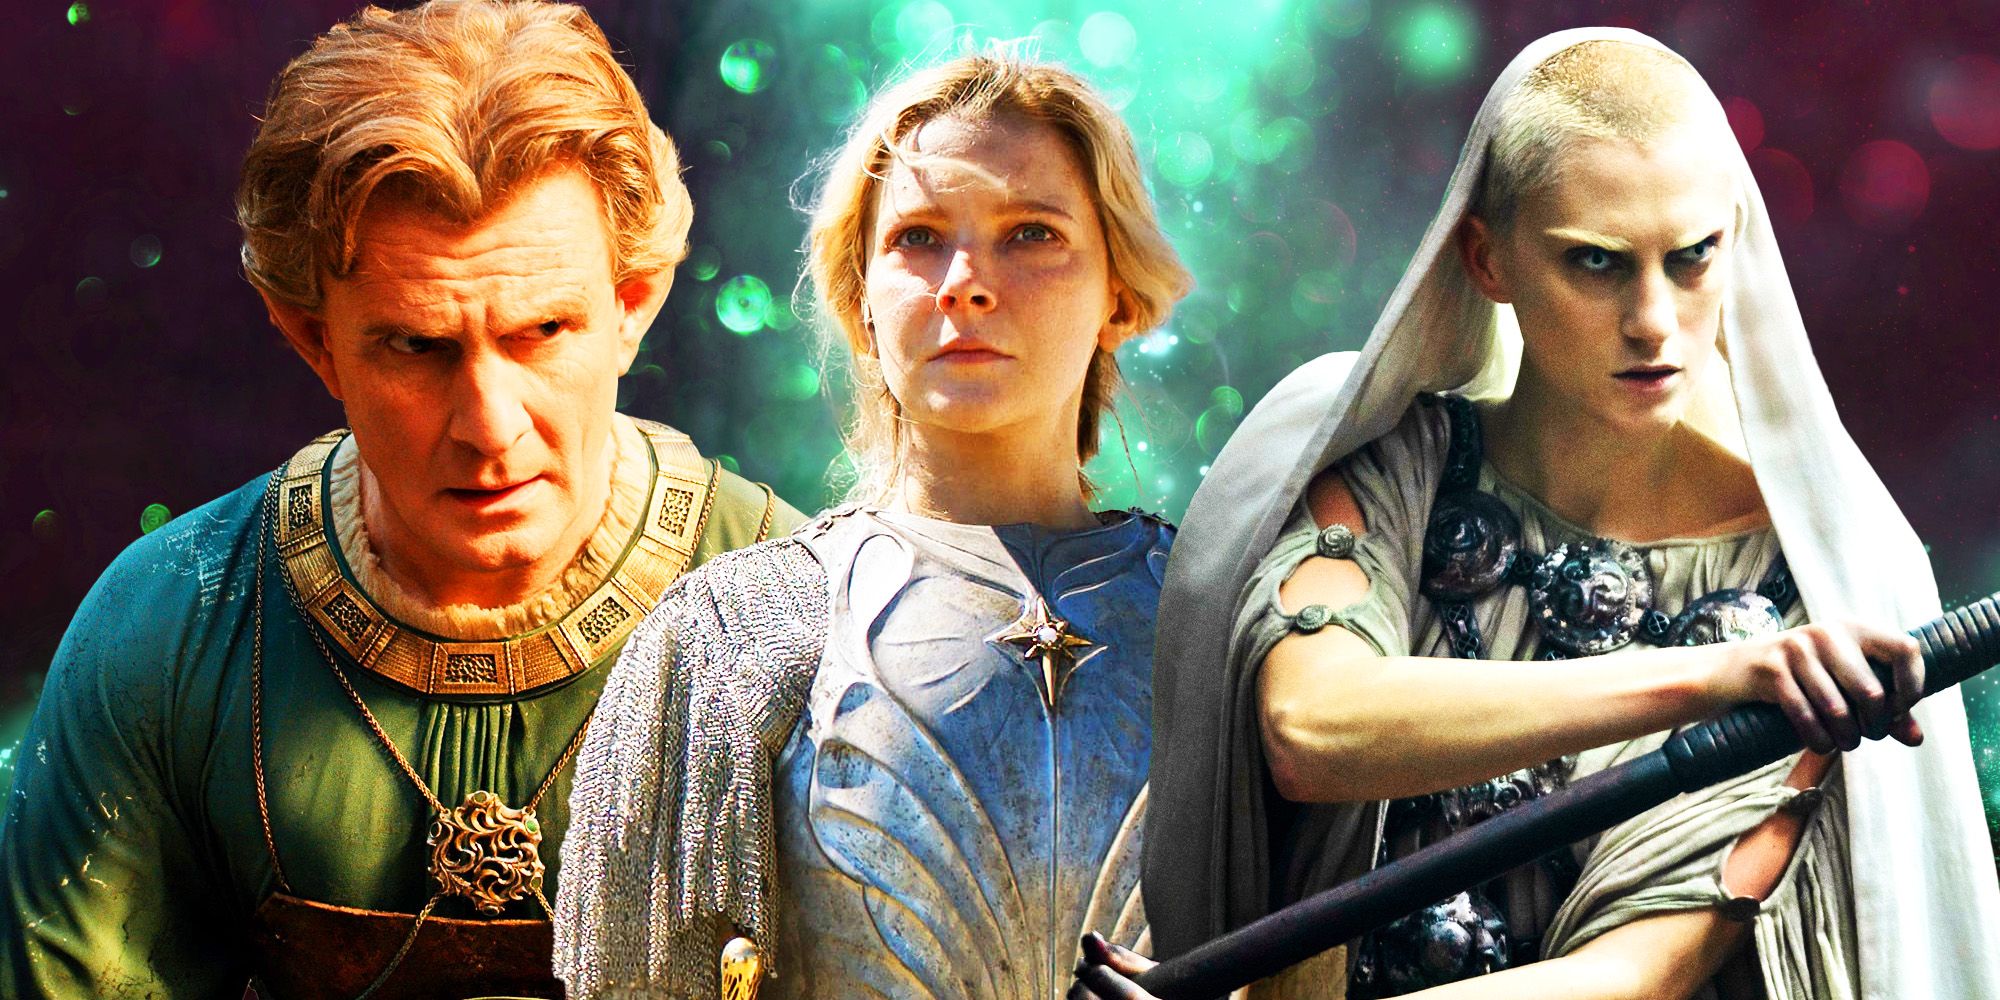 Collage of Charles Edwards as Celebrimbor, Morfydd Clark as Galadriel, and Bridie Sisson as the Dweller